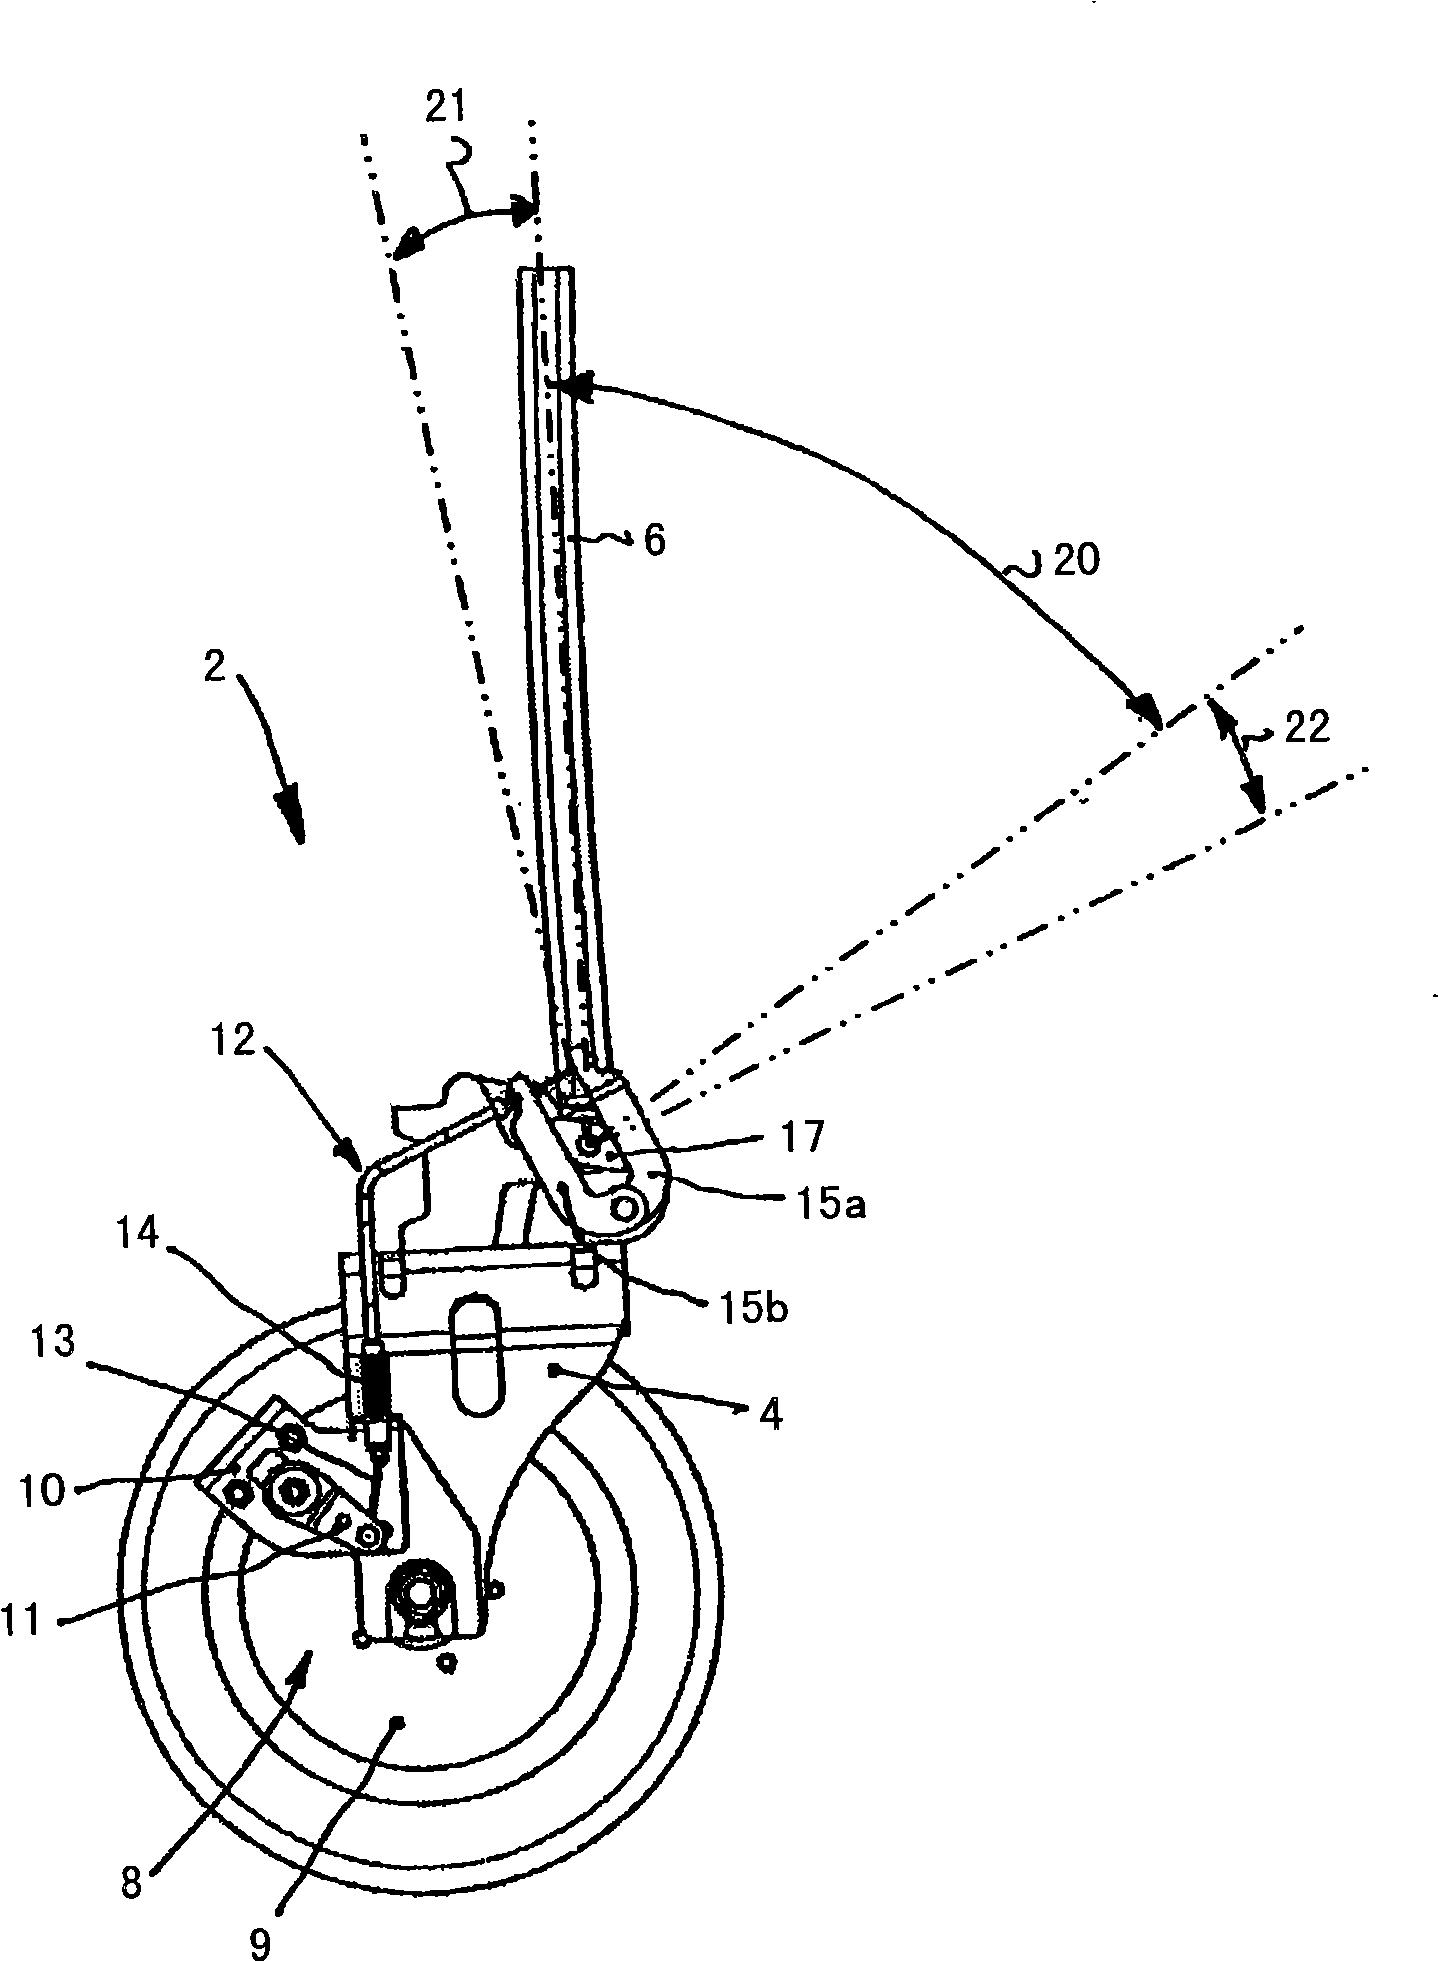 Ground conveying machinery operated by rudder stock